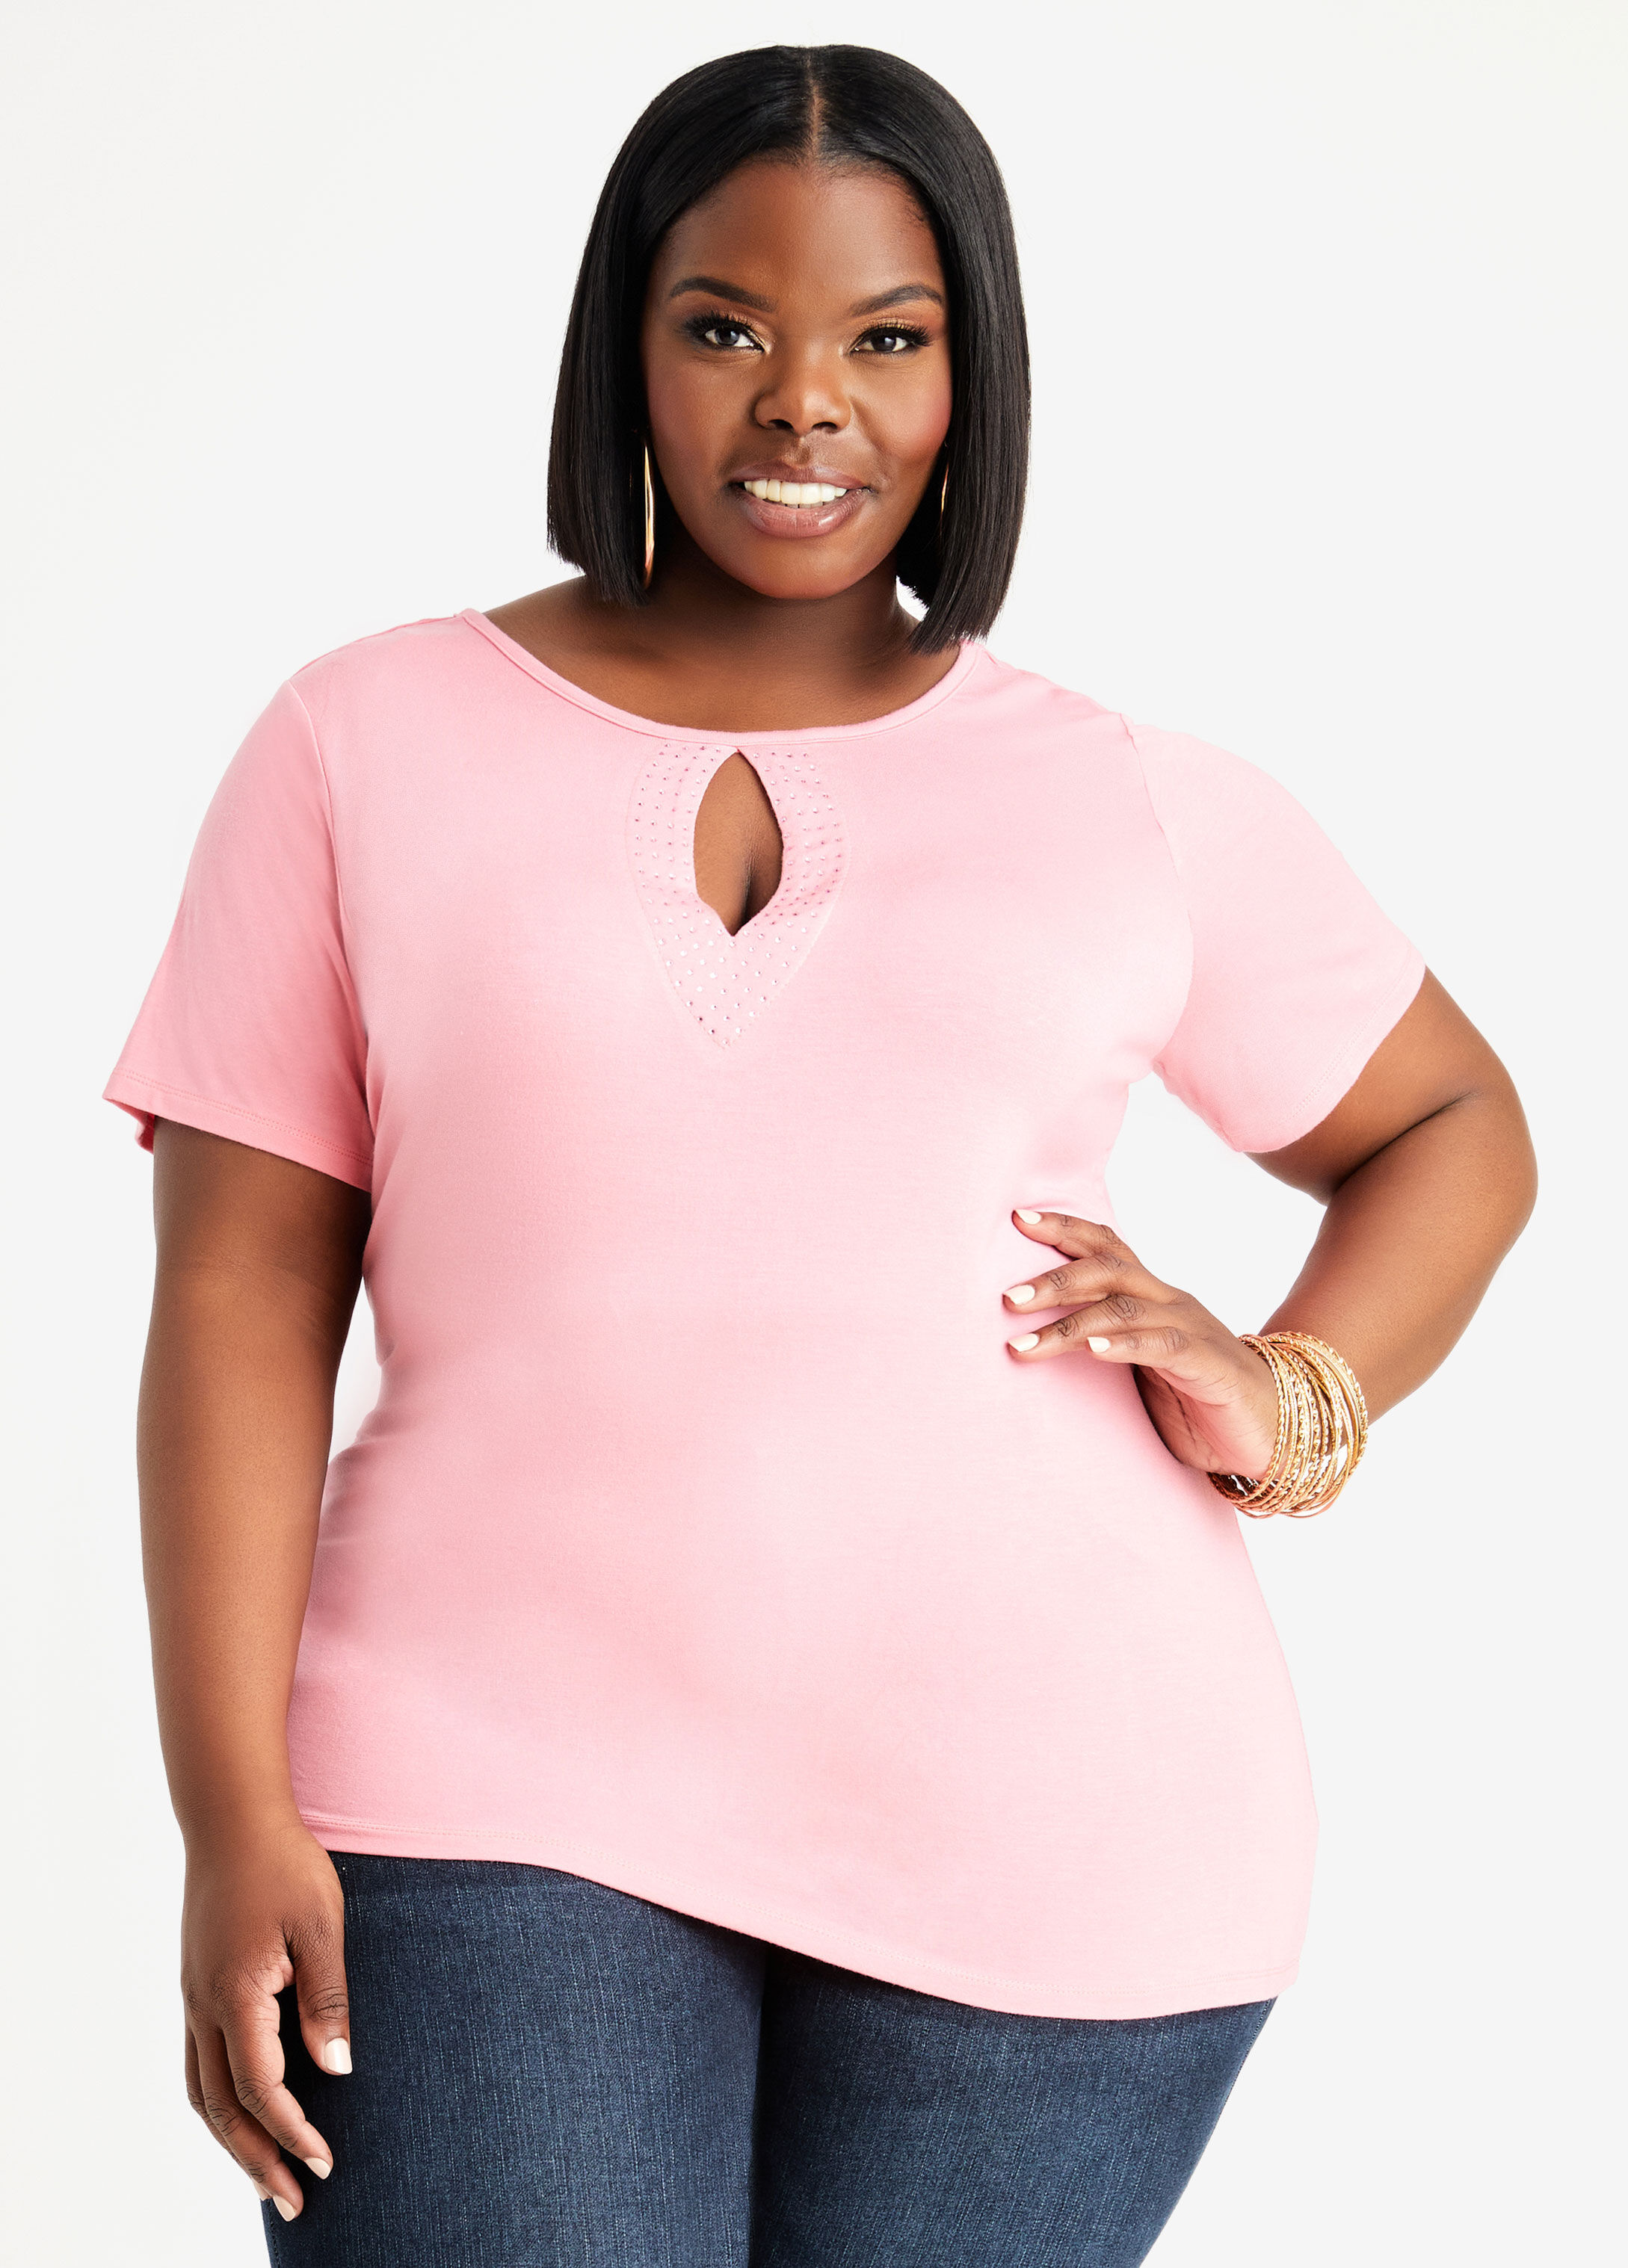 Size Keyhole Top Stretchy Plus Size Tops